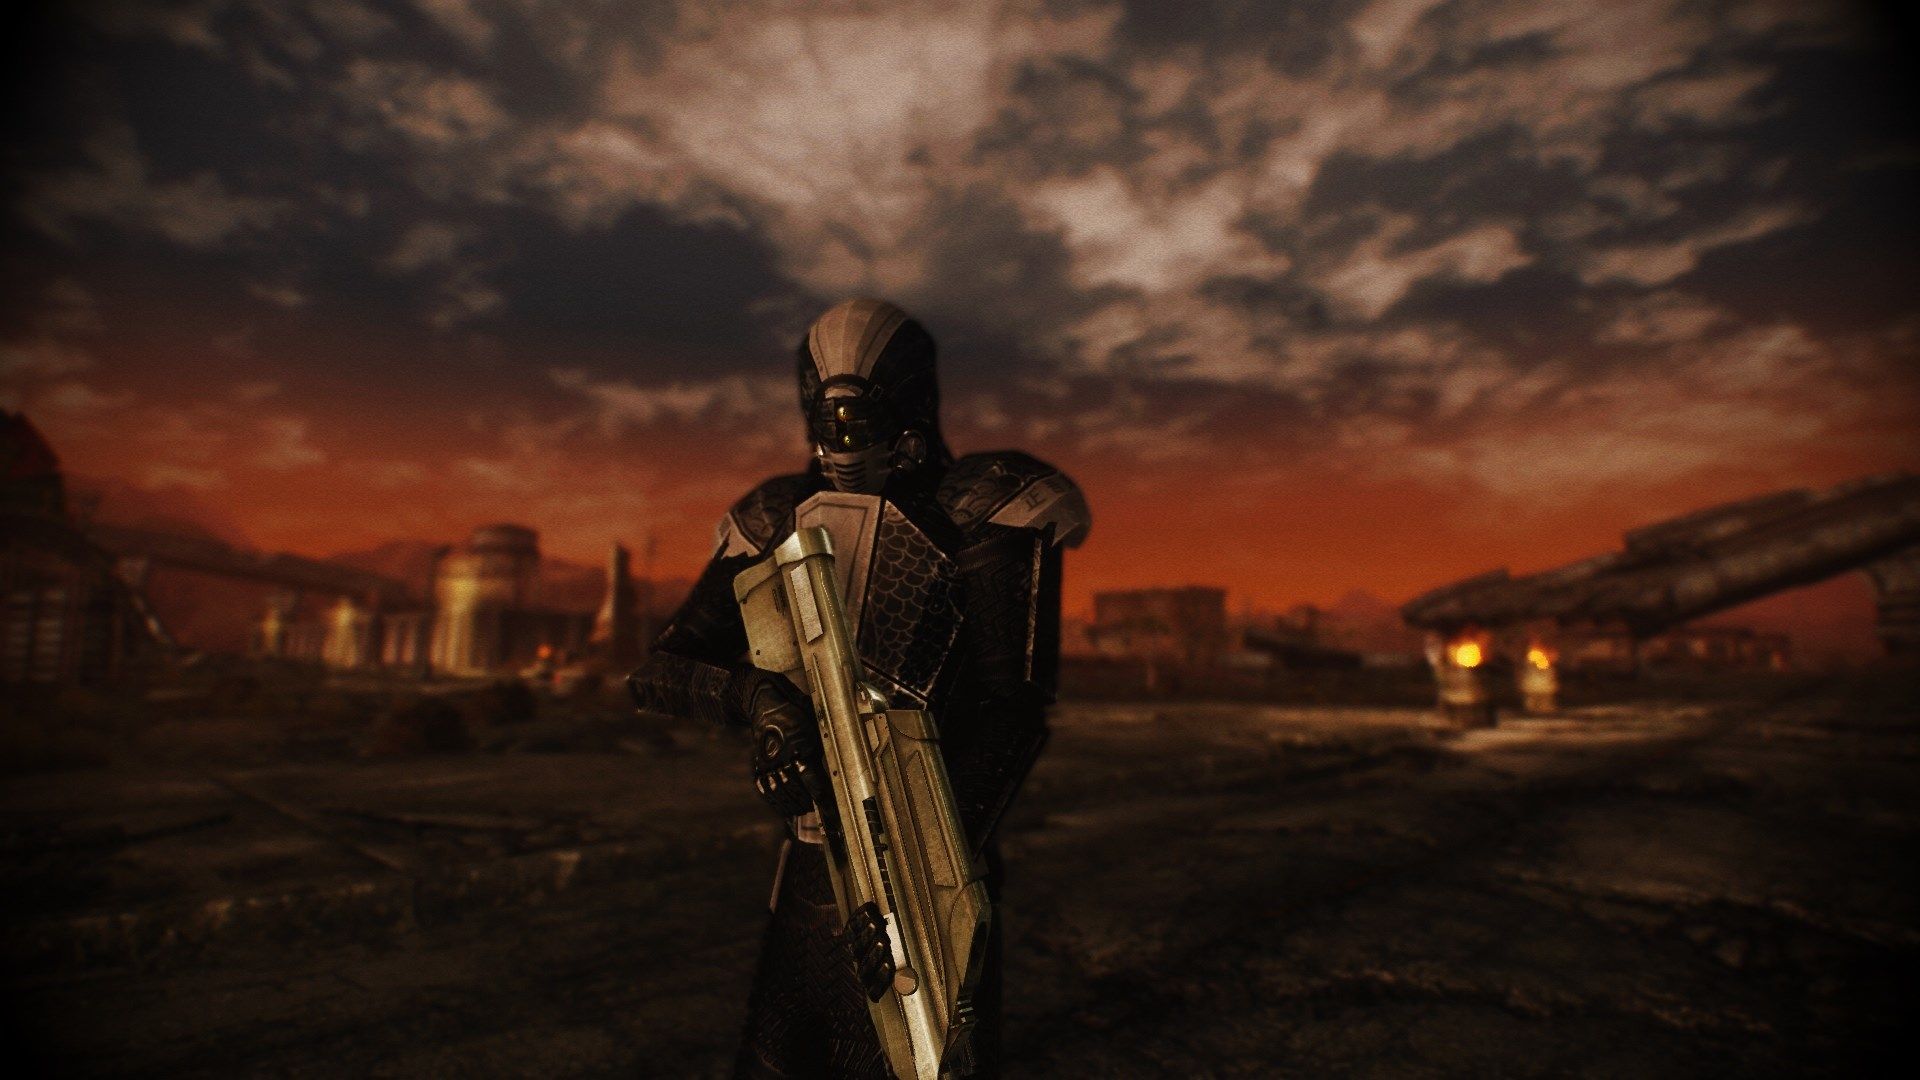 free for mac download Fallout: New Vegas